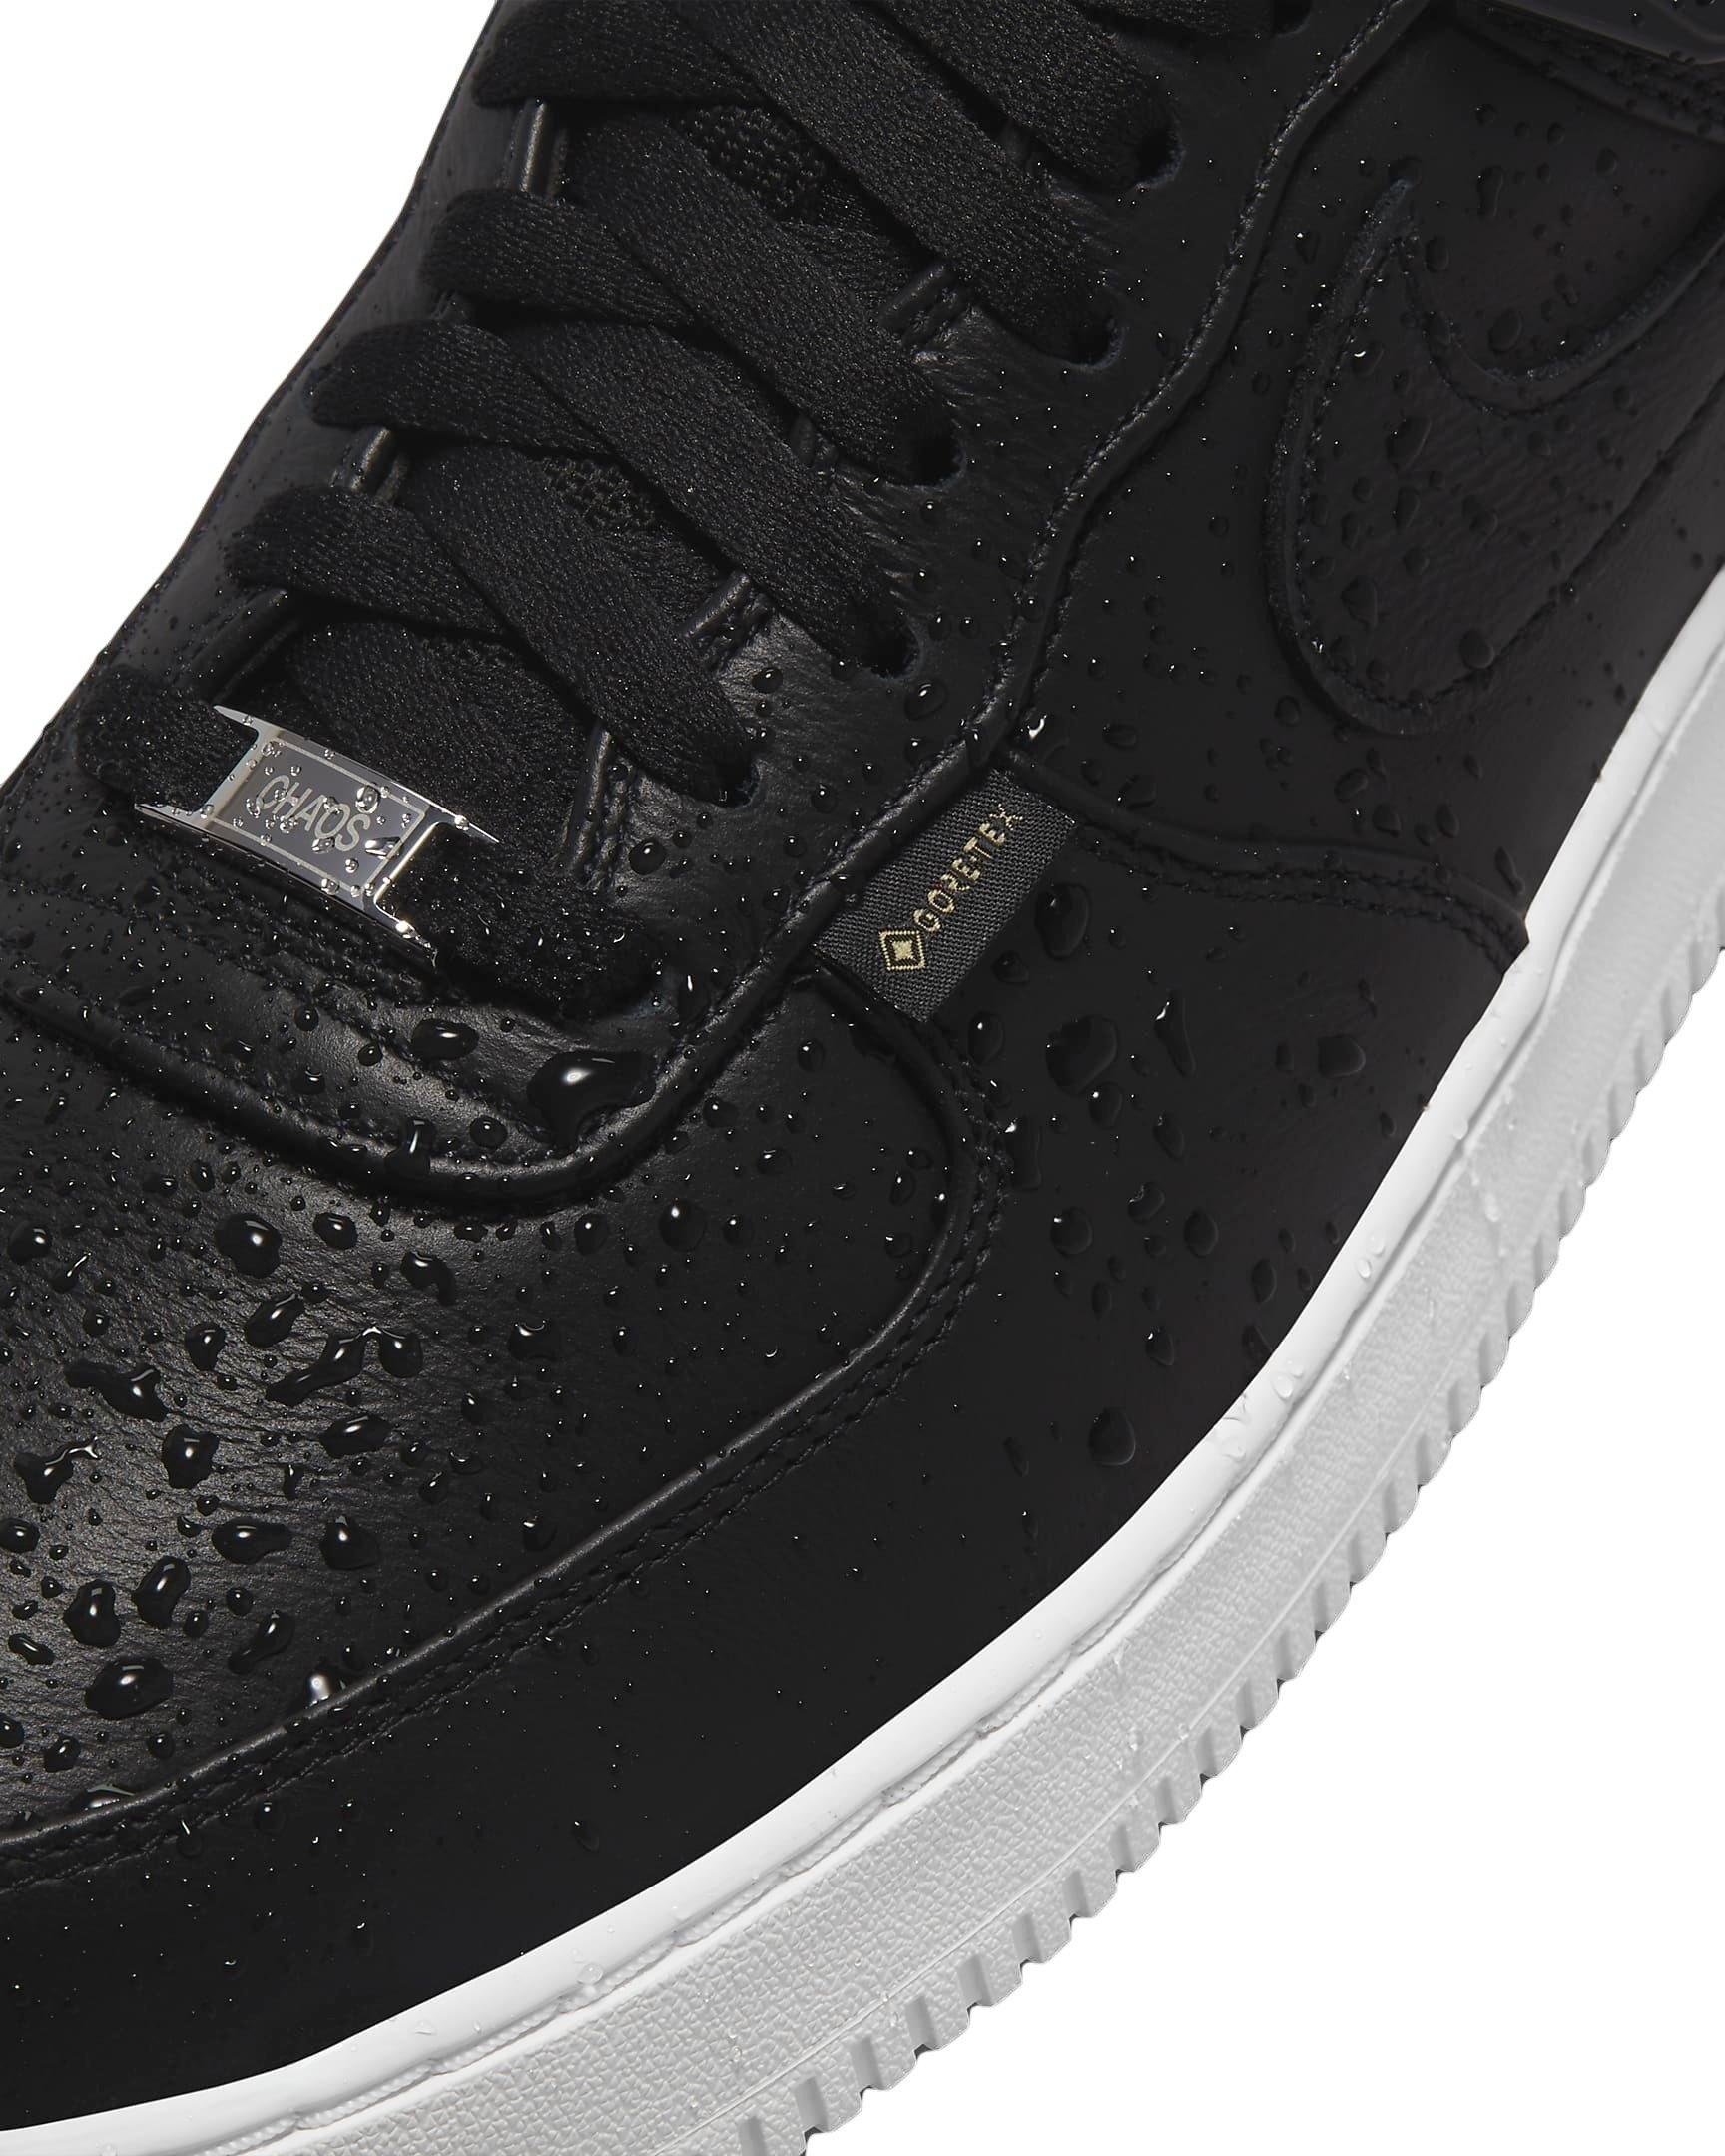 Nike x Undercover Air Force 1 Low SP - Black / White 11.5